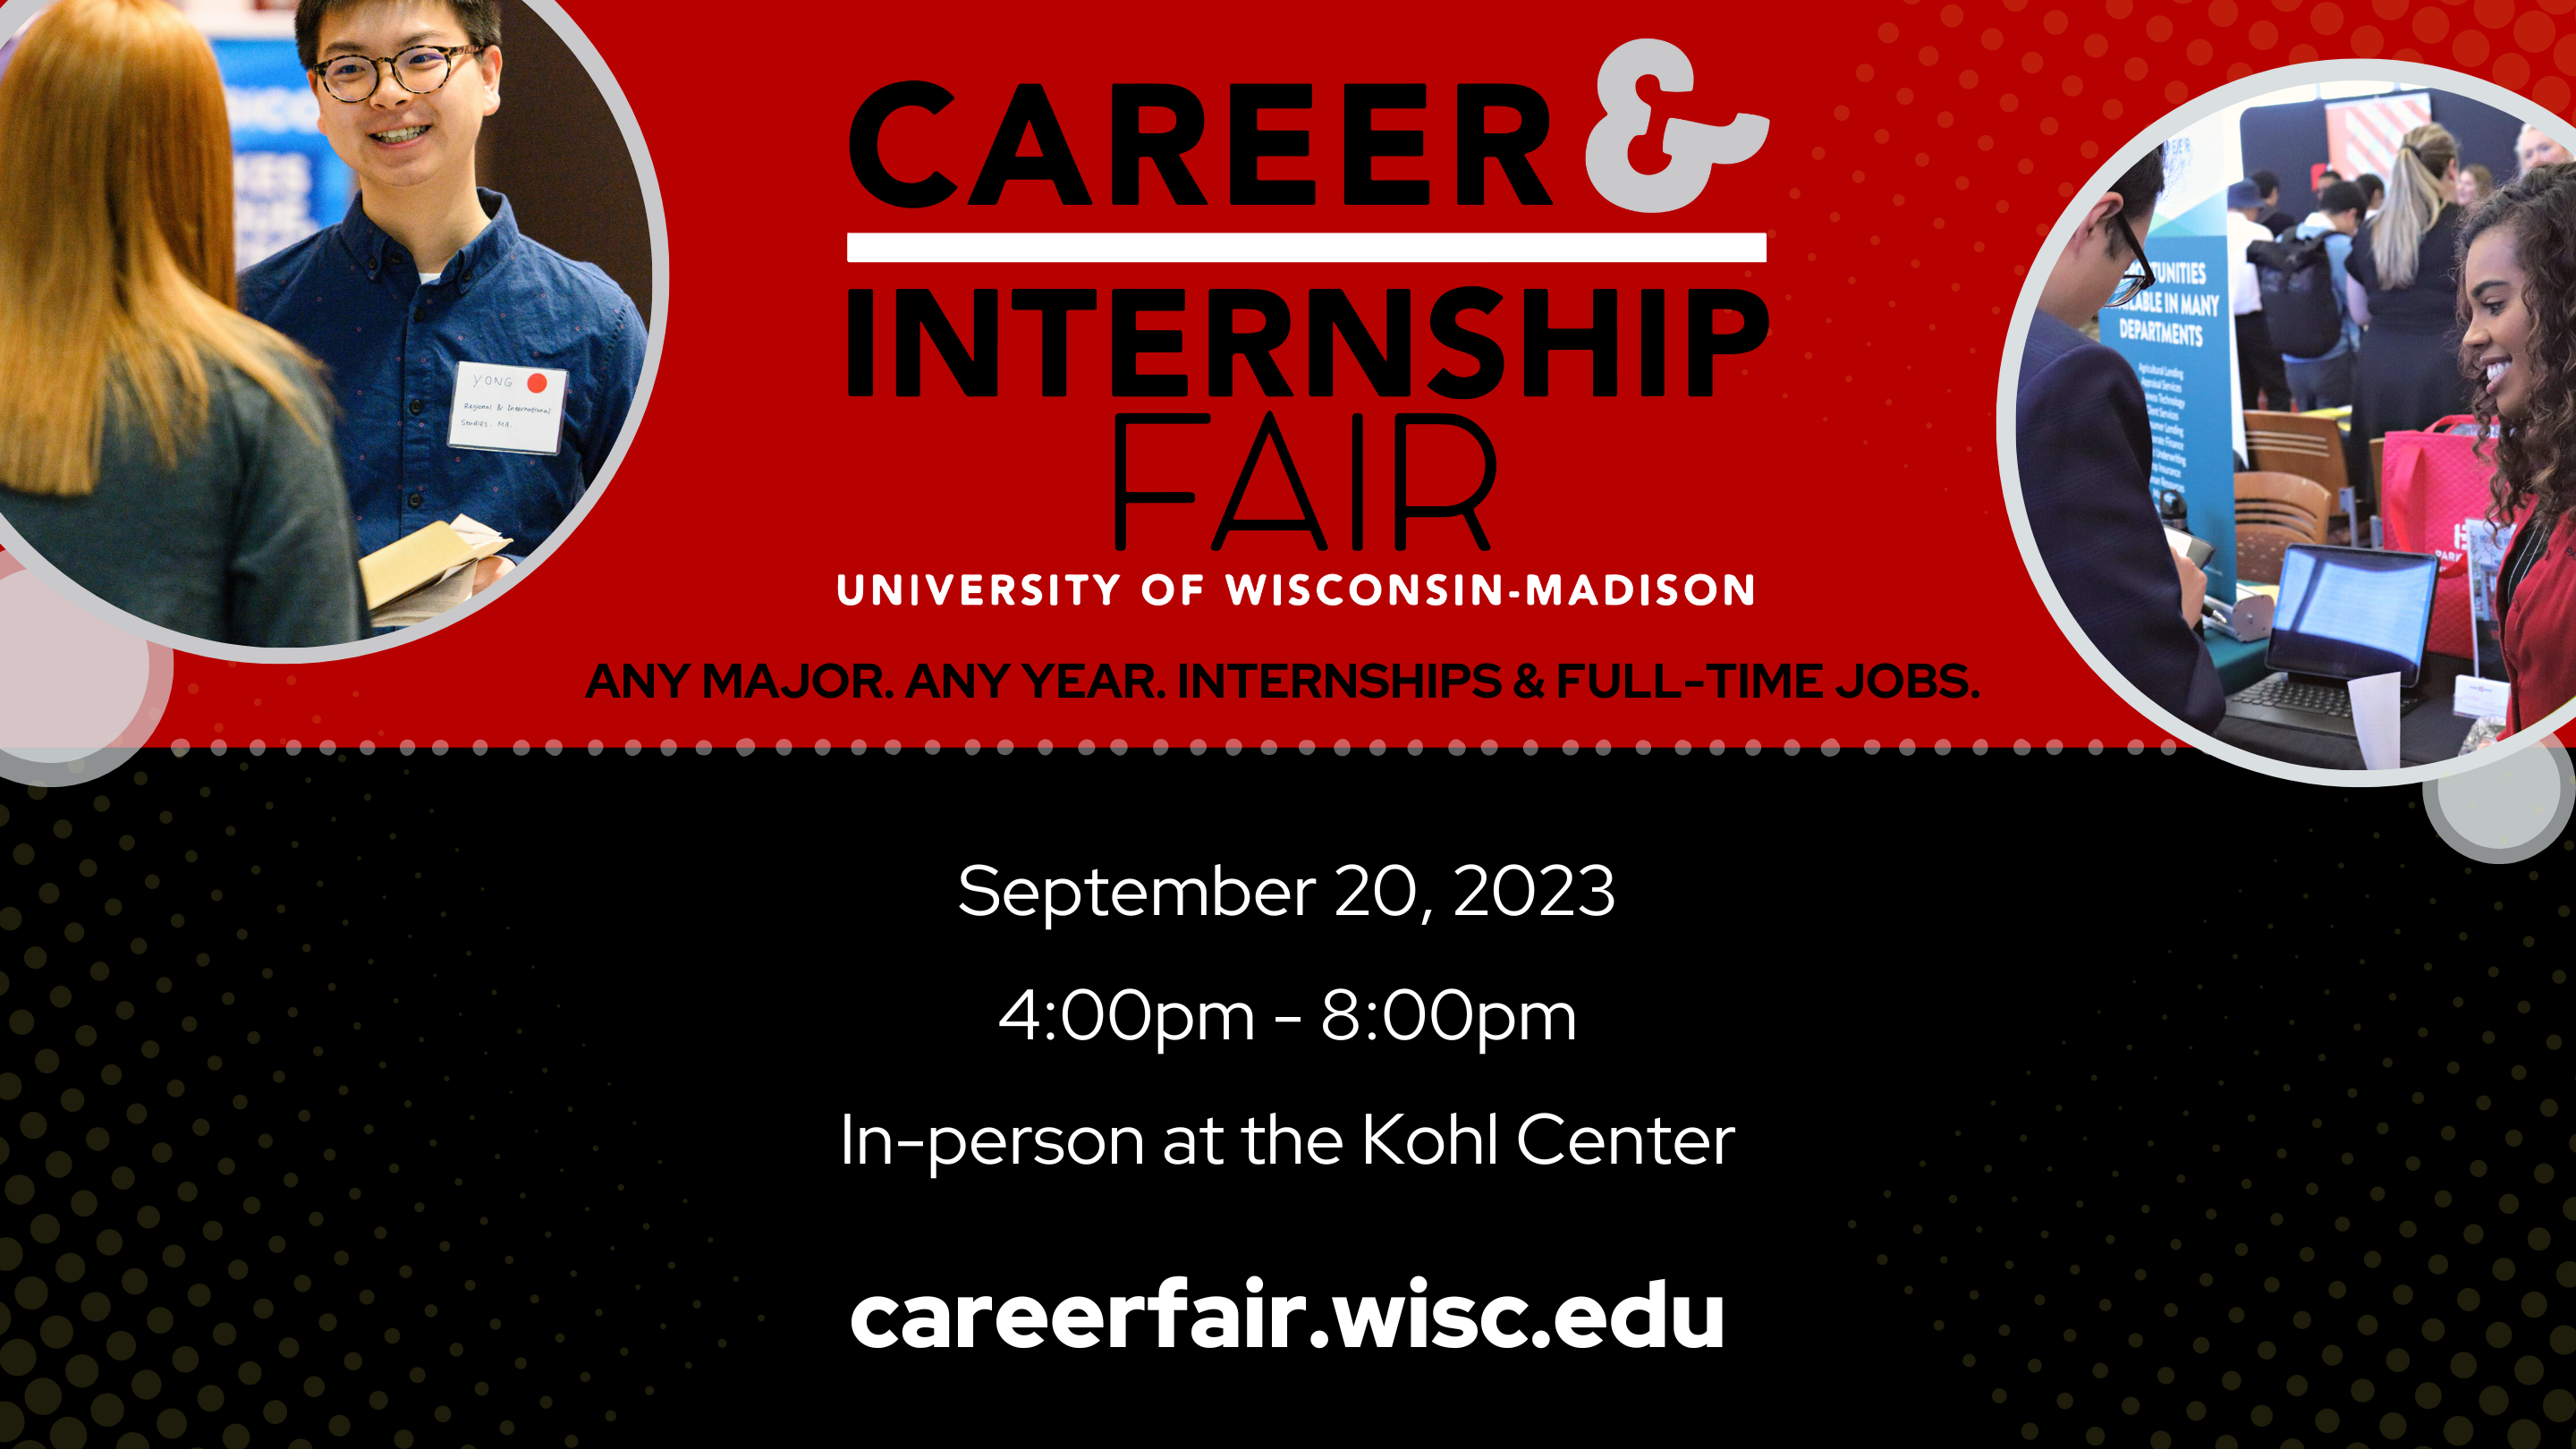 Banner reading "Career and Internship Fair" with details for the event.